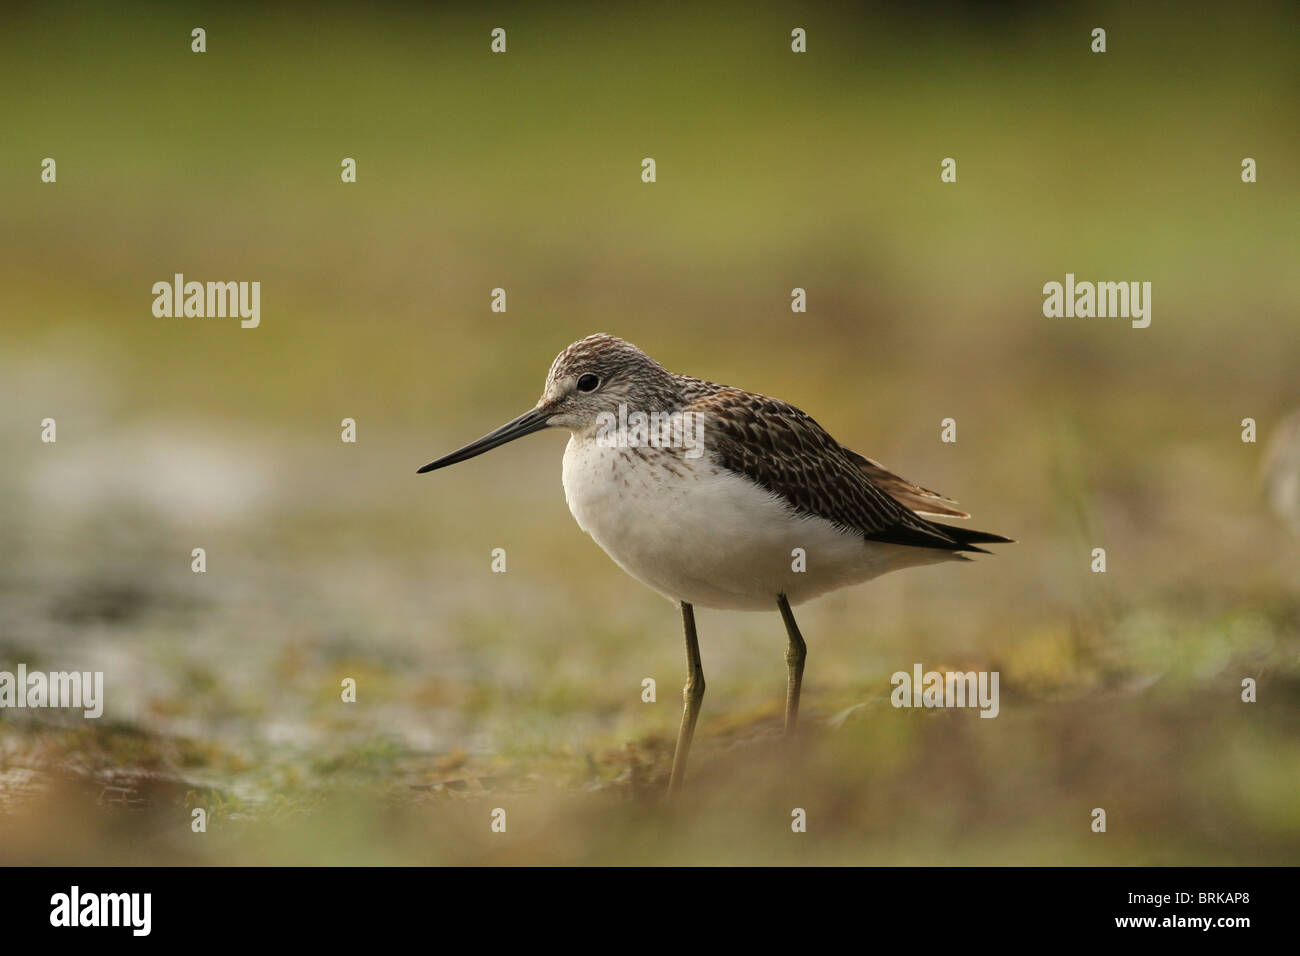 Greenshank portrait with green and brown background Stock Photo